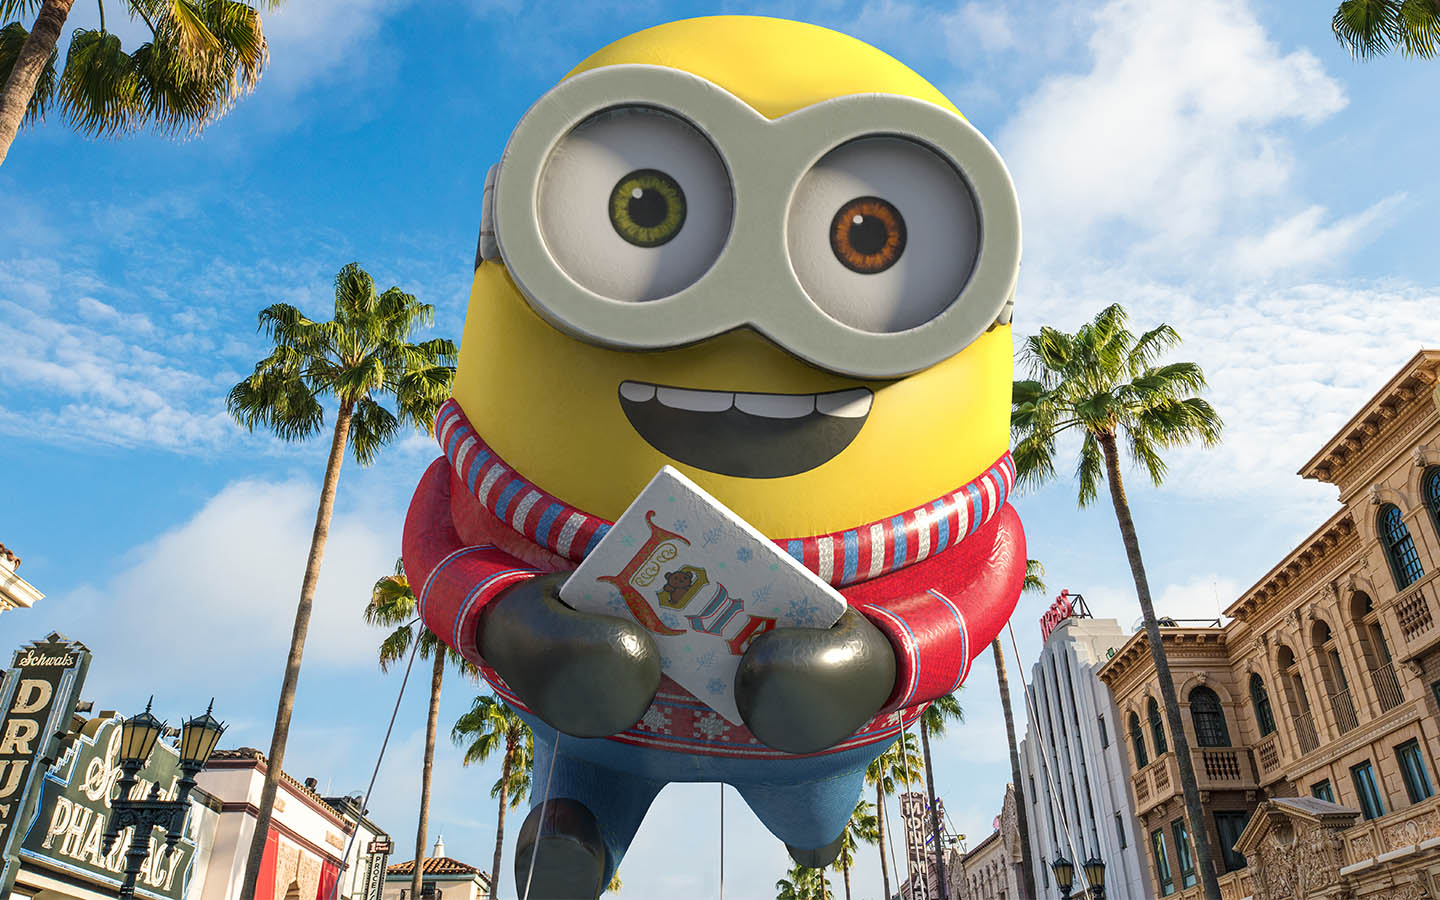 Universal's Holiday Parade Featuring Macy's Despicable Me Balloon